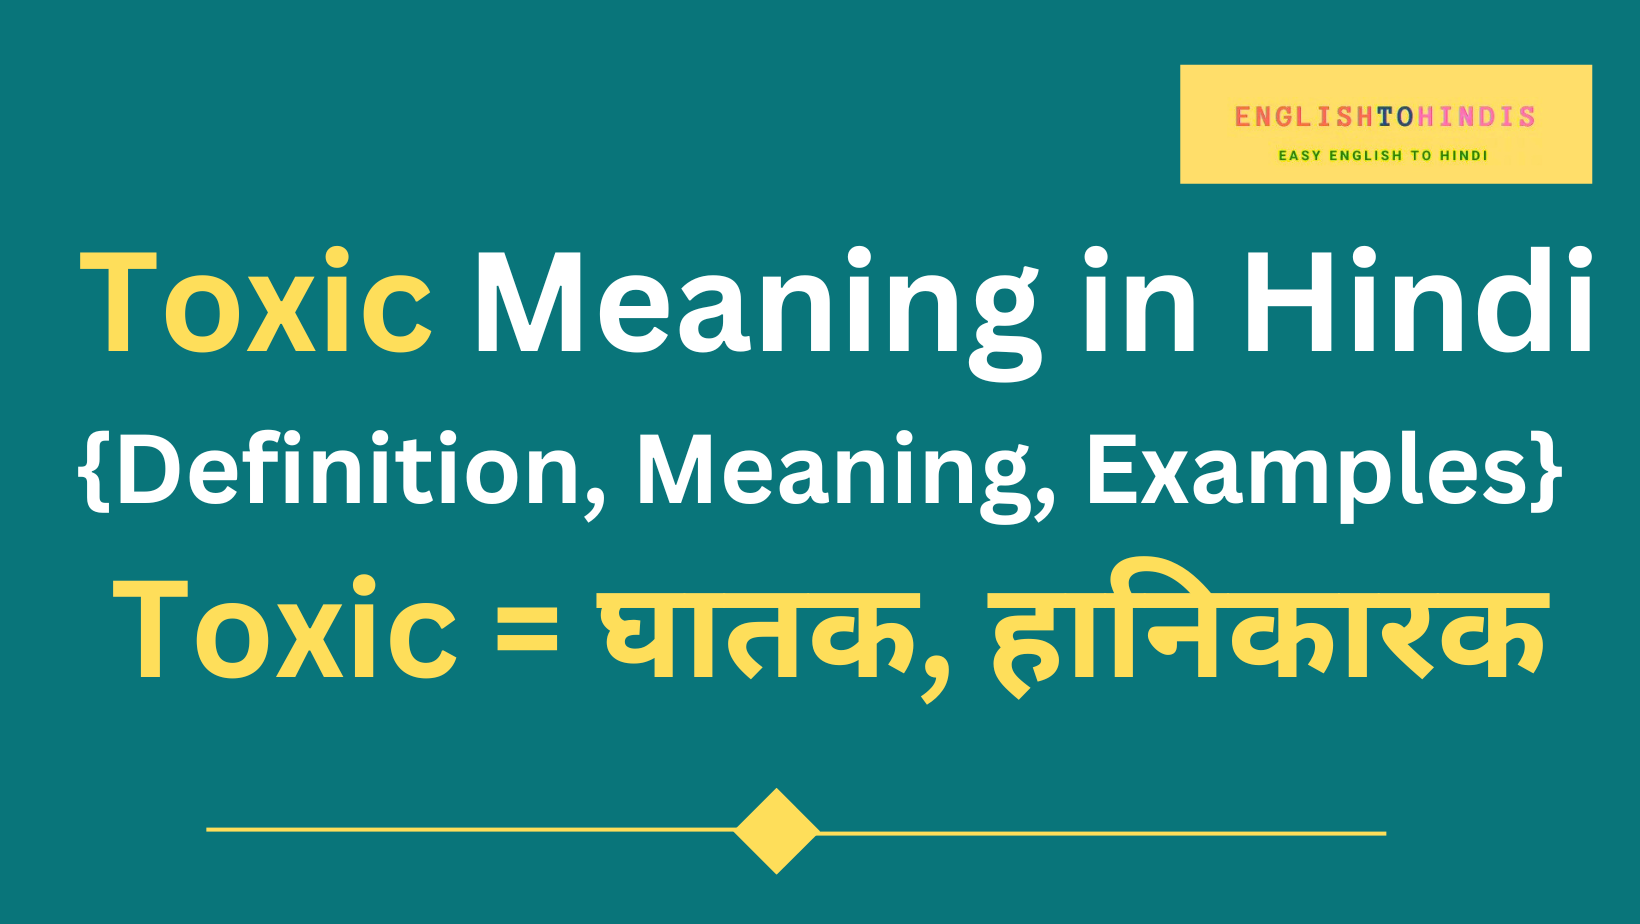 Toxic Meaning in Hindi